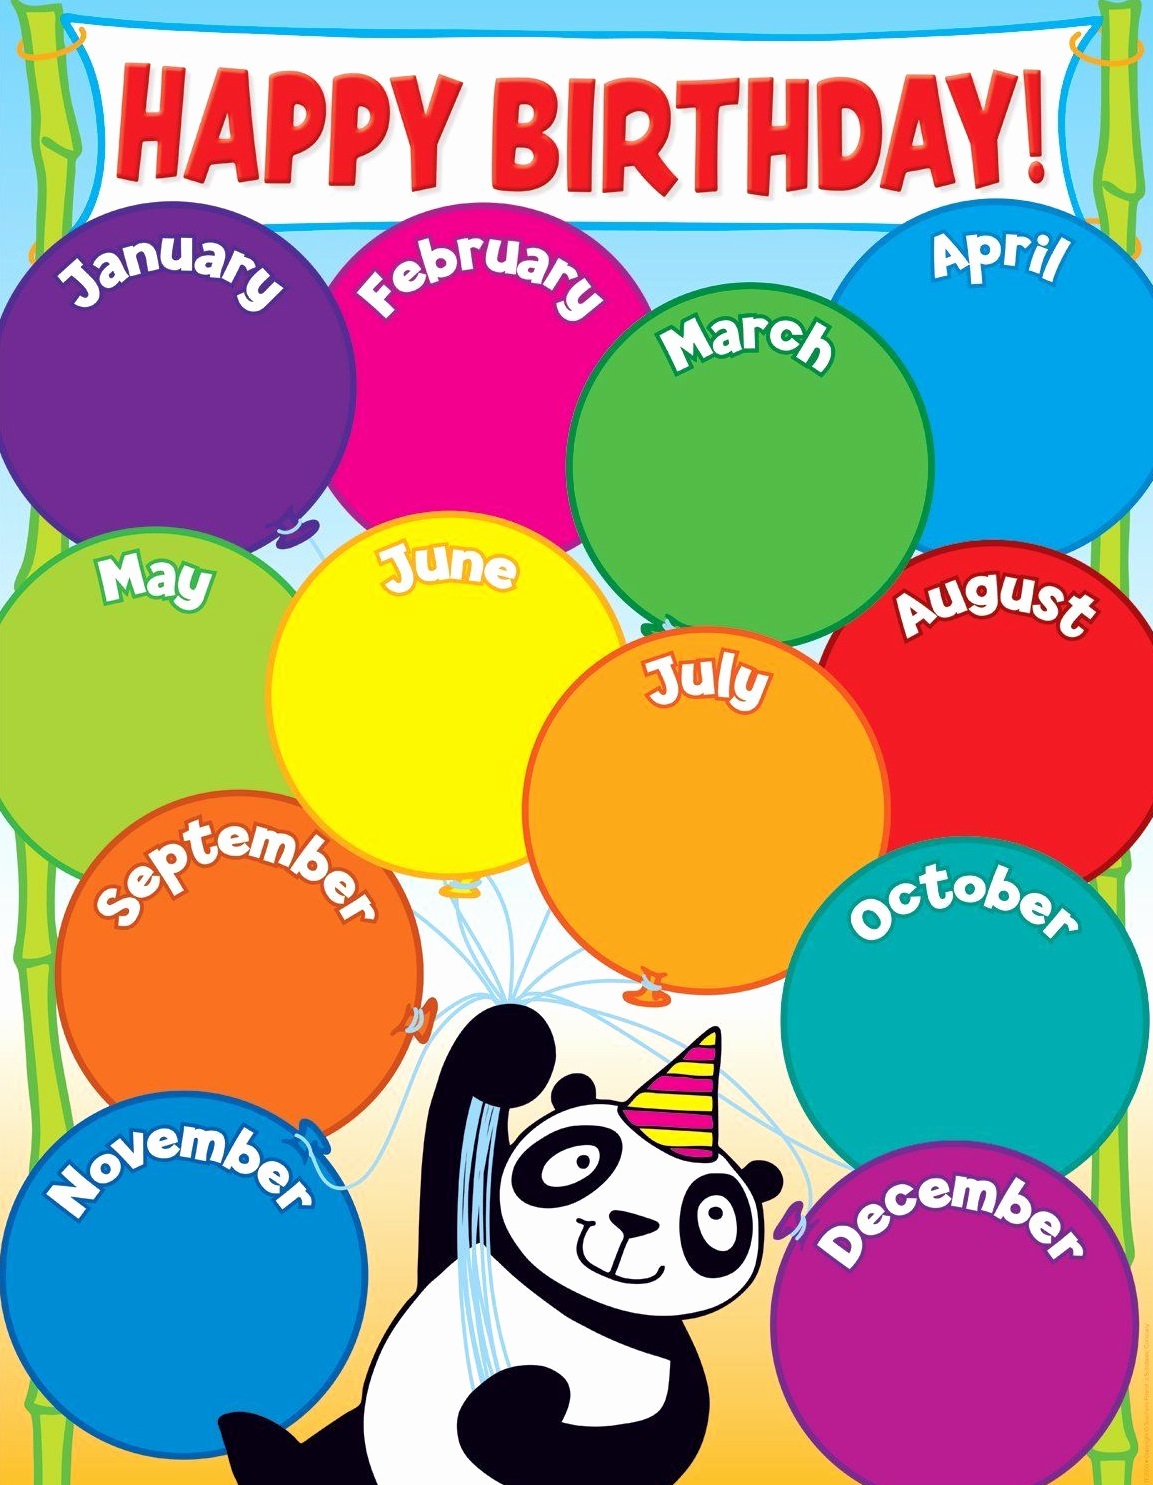 Happy Birthday! Months of the Year chart